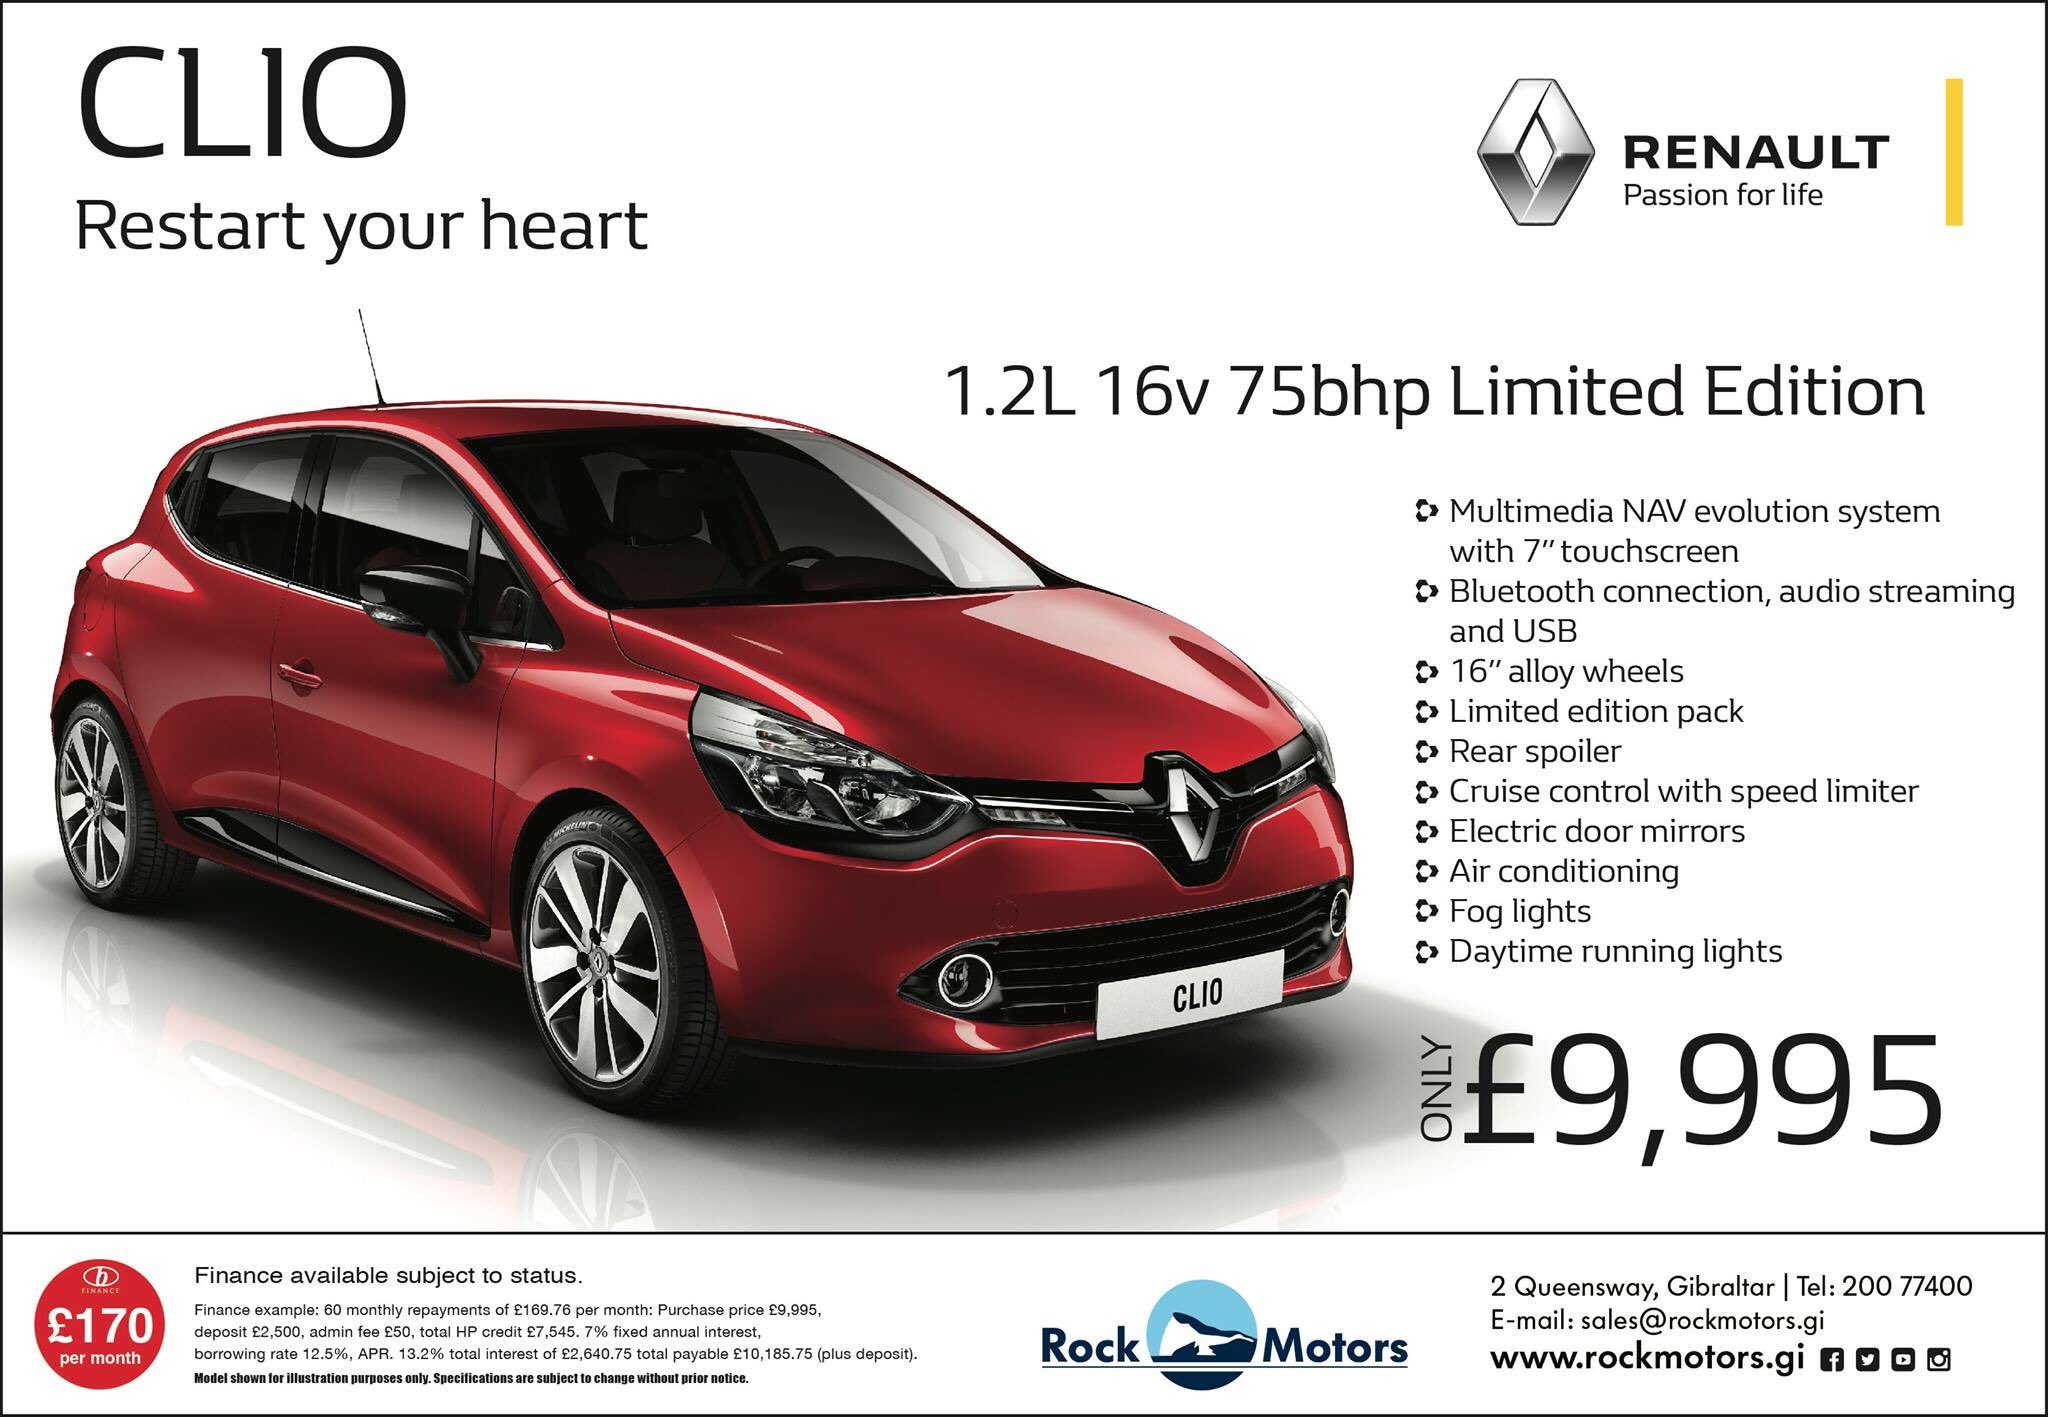 Rock Motors Twitter: "Did you spot our Renault Clio in ICC the last two weeks? If not, check out what its all about below! From only £9,995 -perfect for the rock!